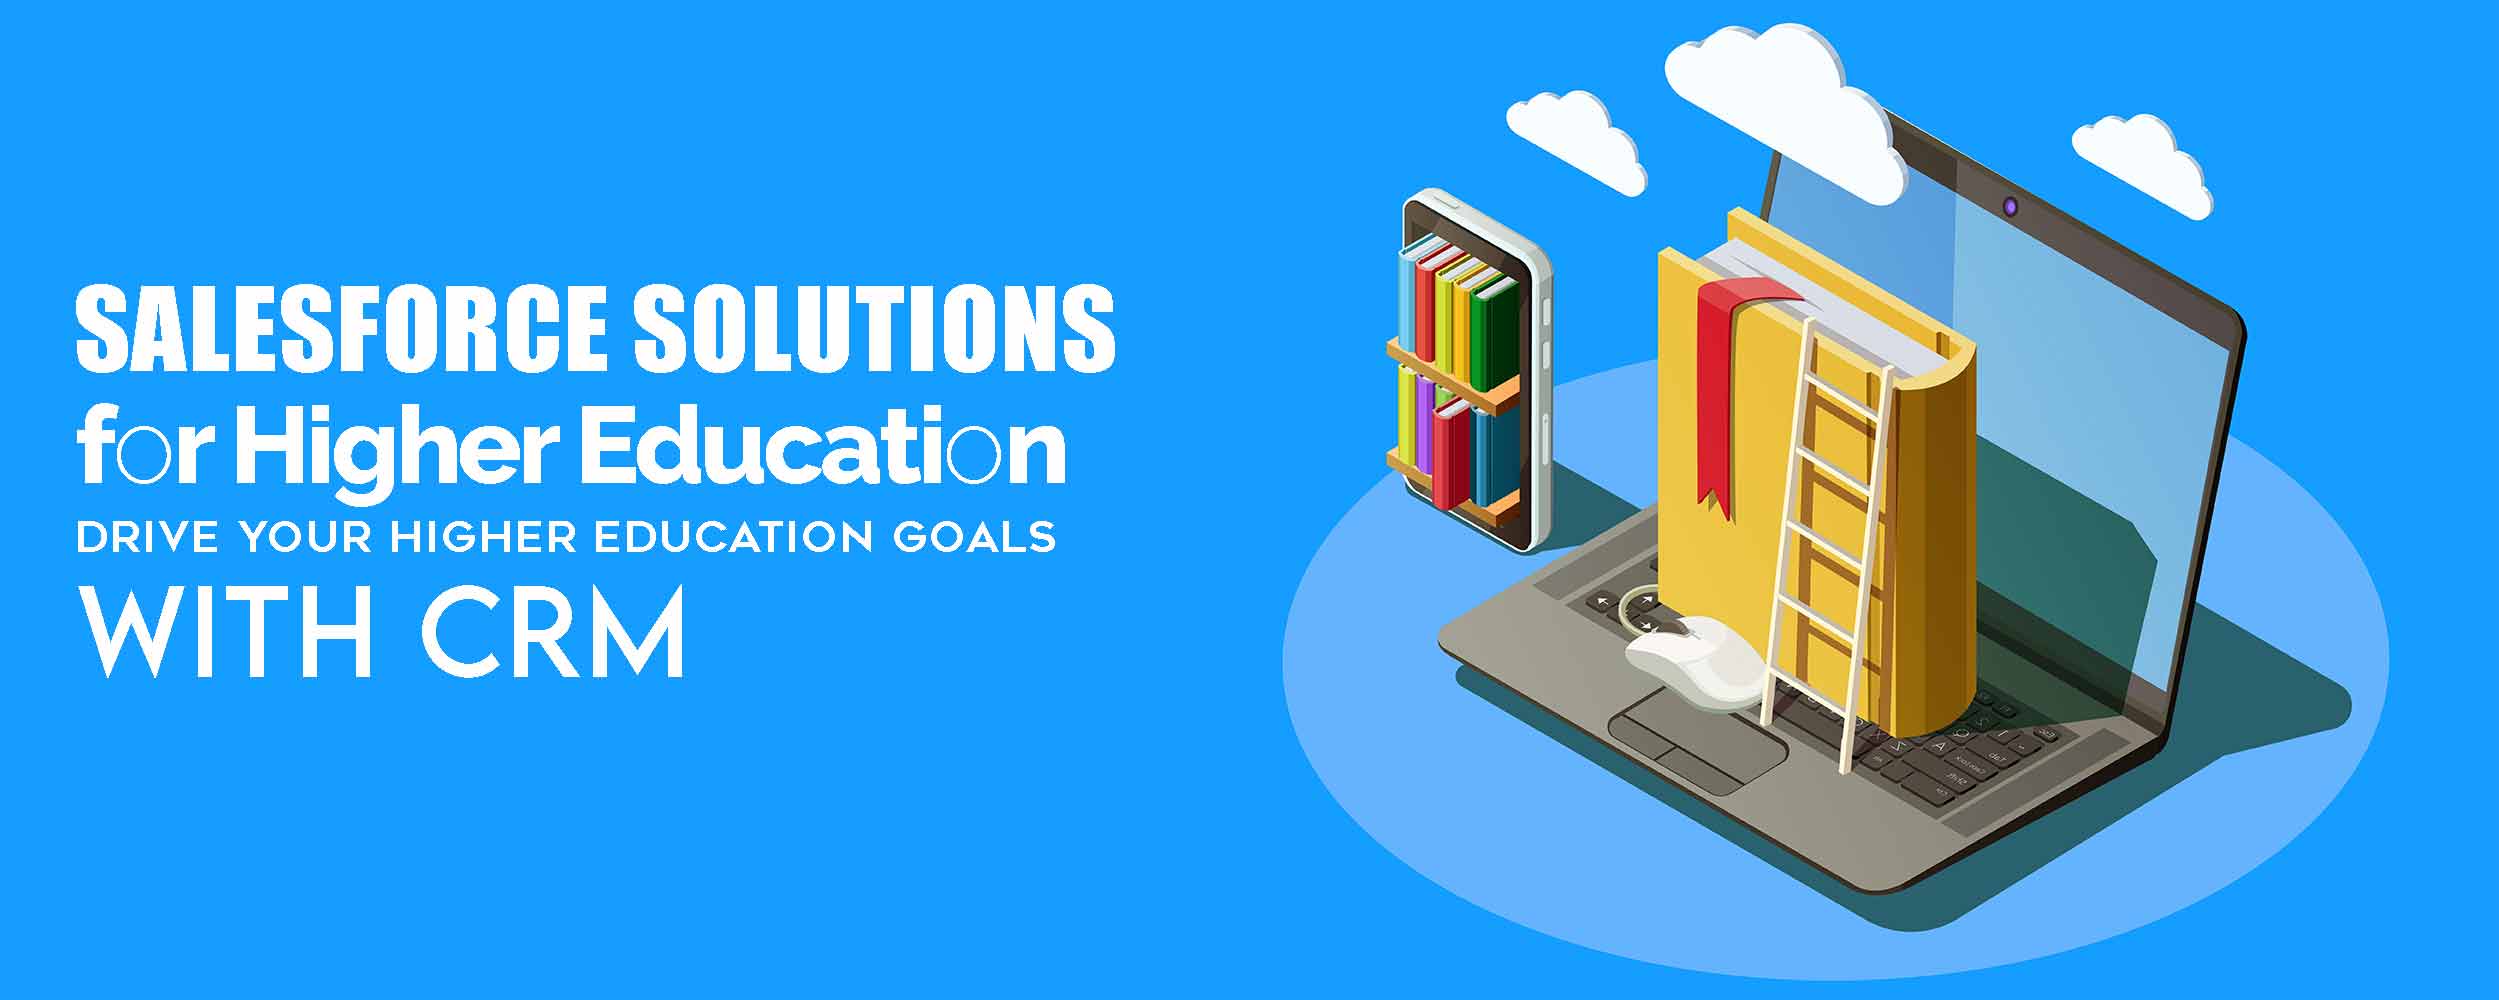 salesforce crm for higher education